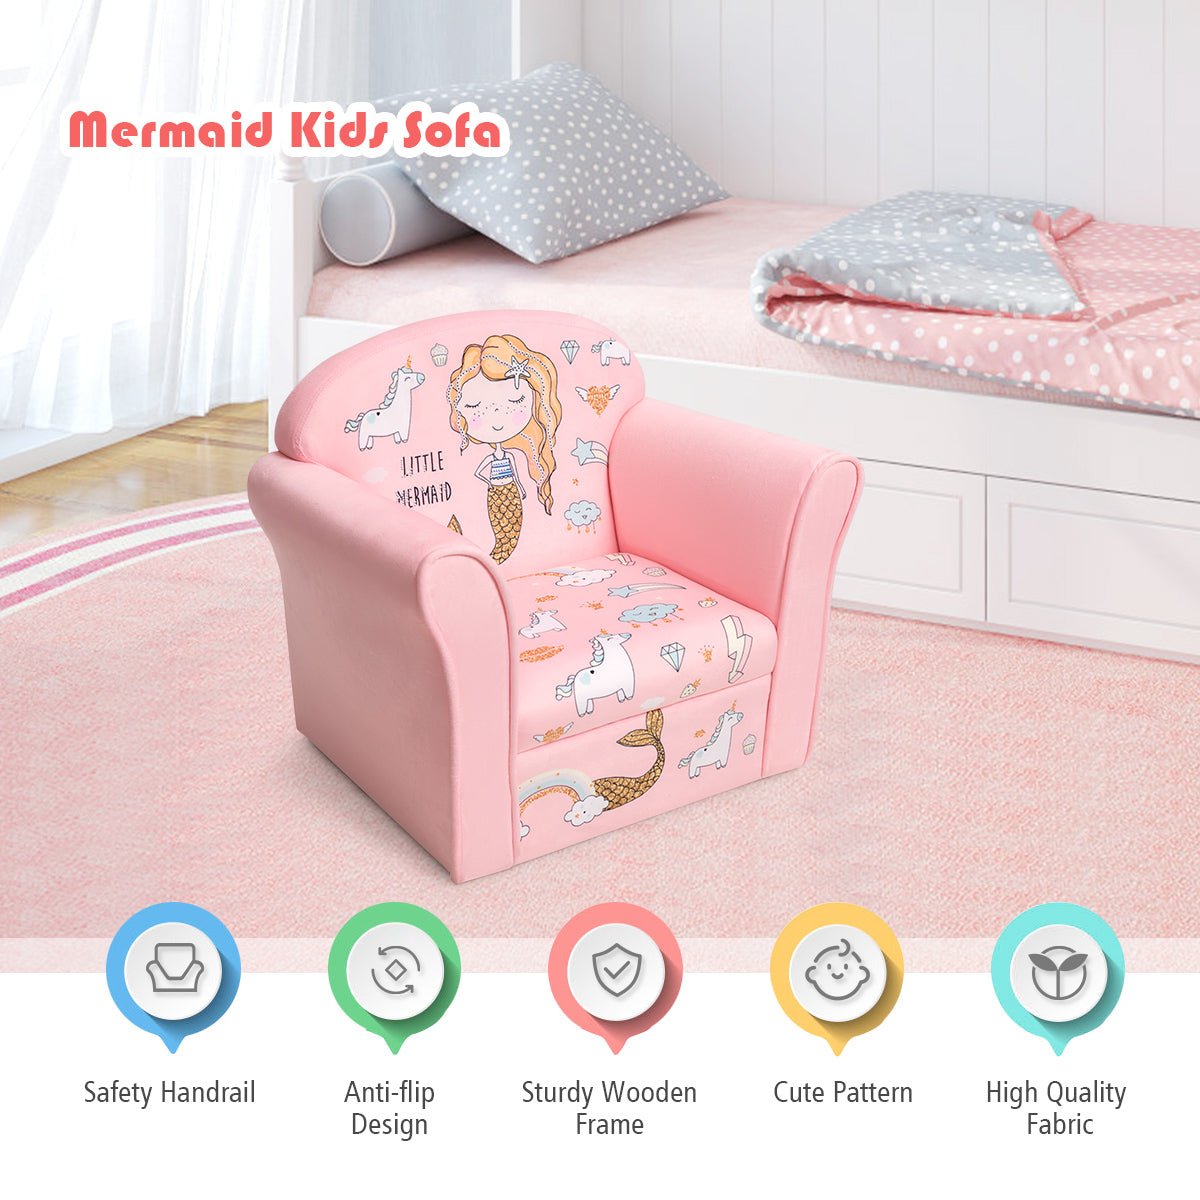 Enchanting Mermaid Pattern Kids Sofa: Cozy Bedroom Seating with Playful Style